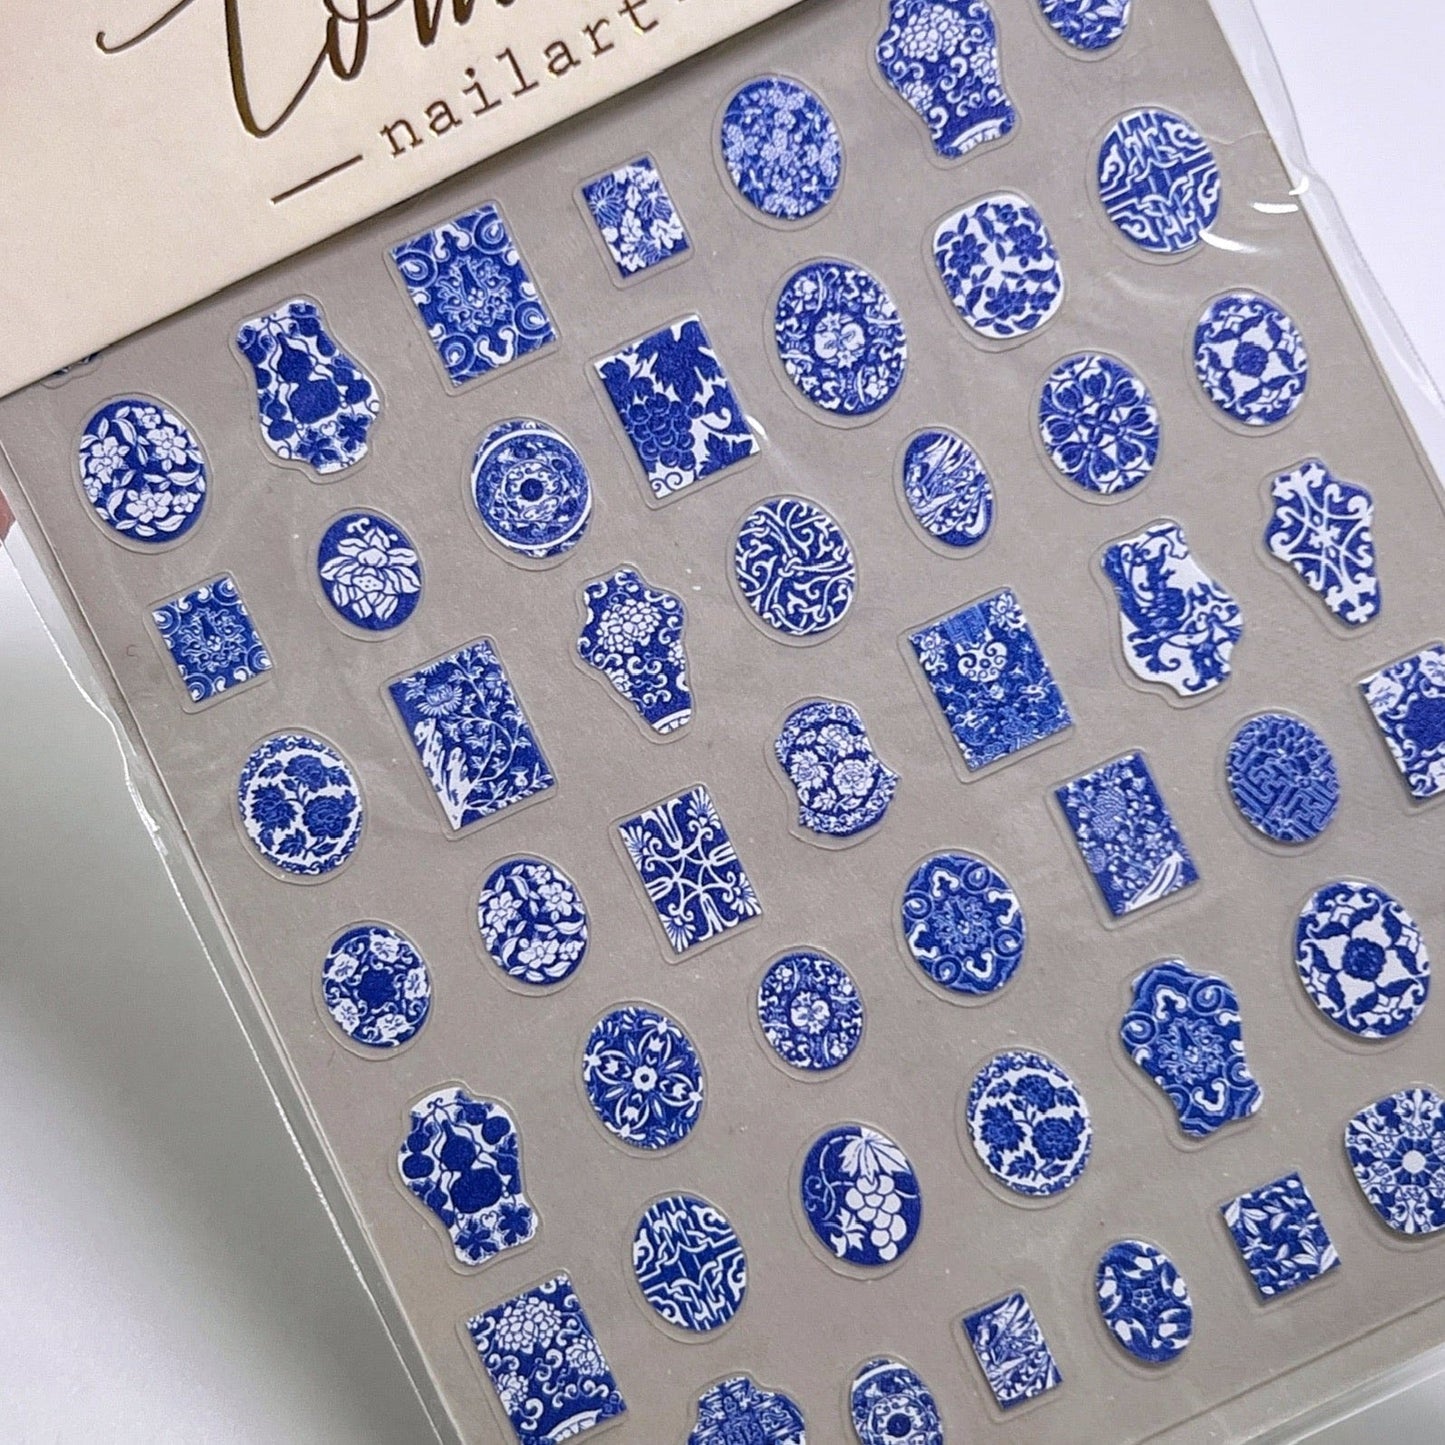 Cameo style nail stickers with blue and white floral motifs. 